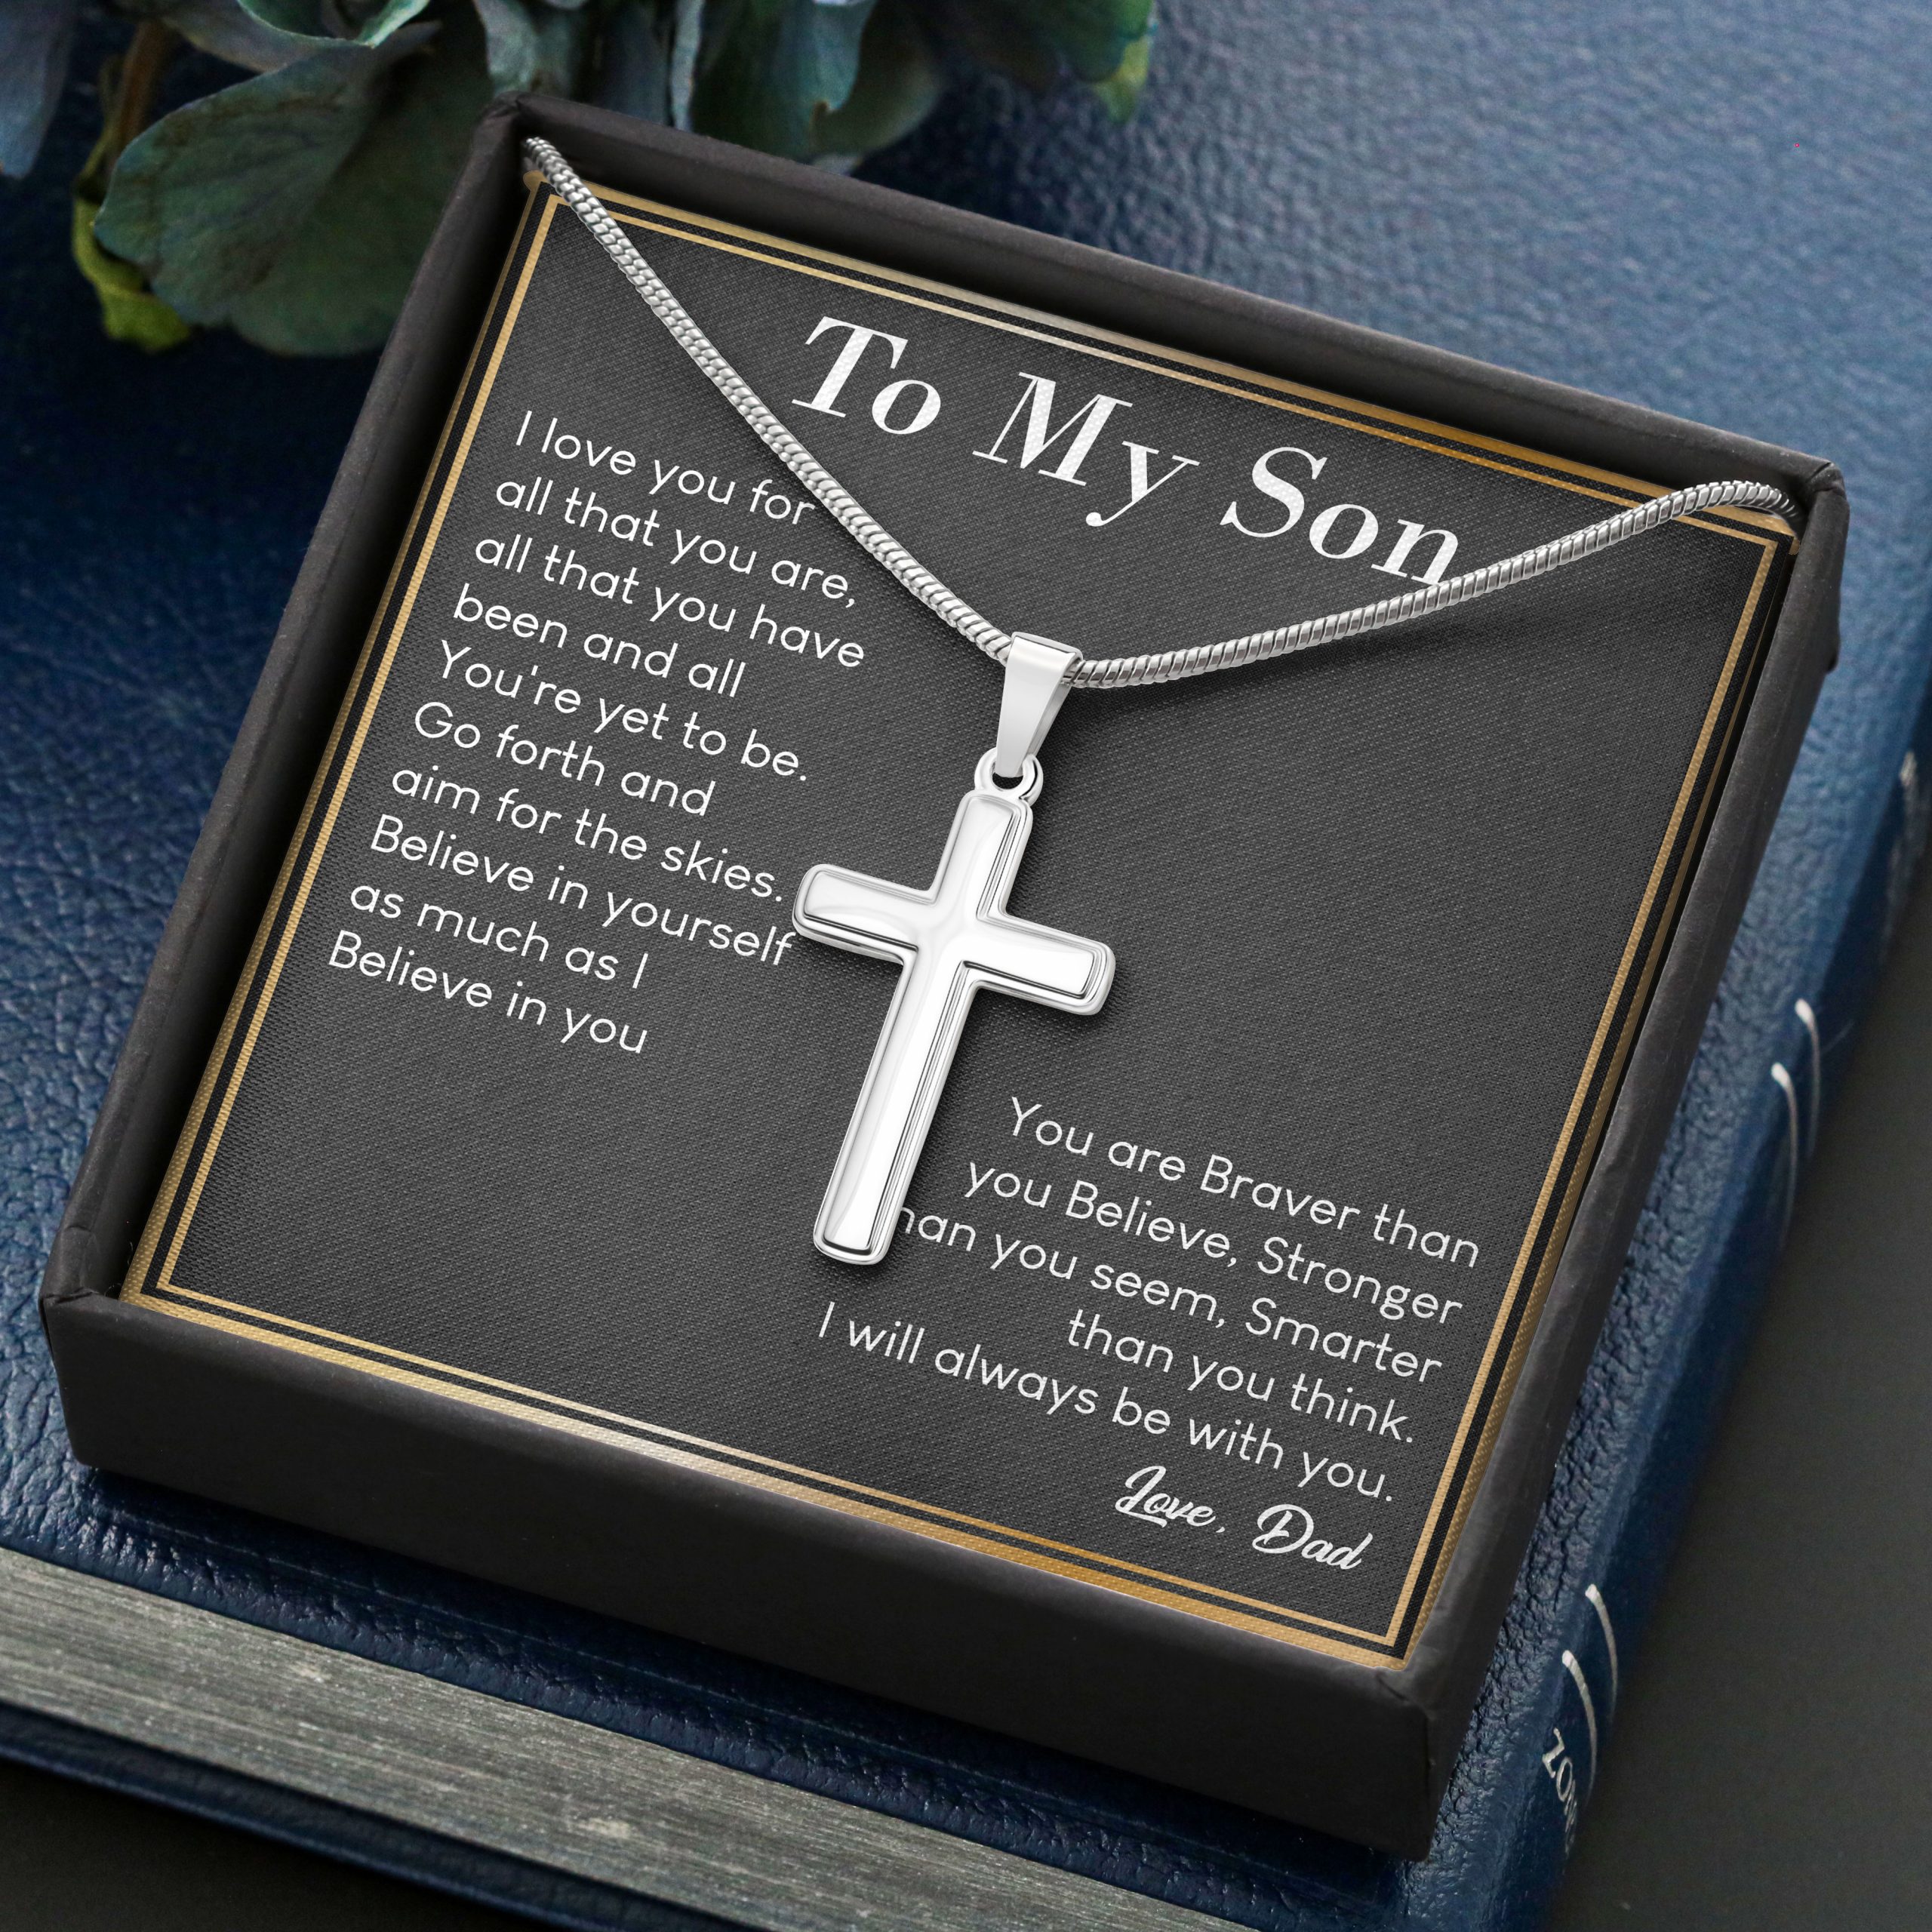 Father Son Necklace - To my son Never forget that I love you | Rugged Gifts